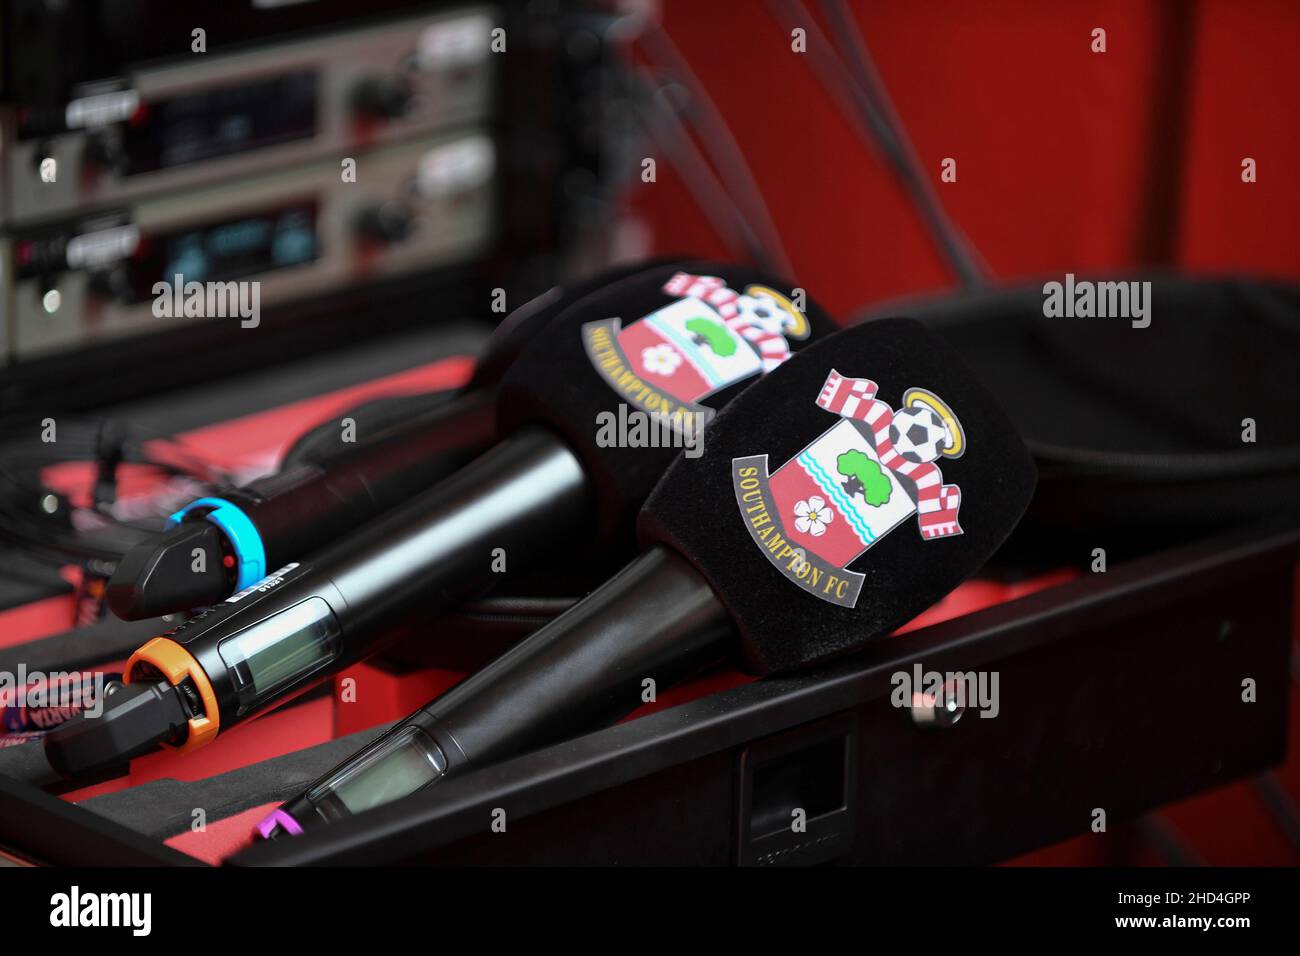 TV microphones are seen with Southampton club badge - Southampton v Burnley, Premier League, St Marys Stadium, Southampton, UK - 22nd October 2021 Editorial Use Only - DataCo restrictions apply Stock Photo